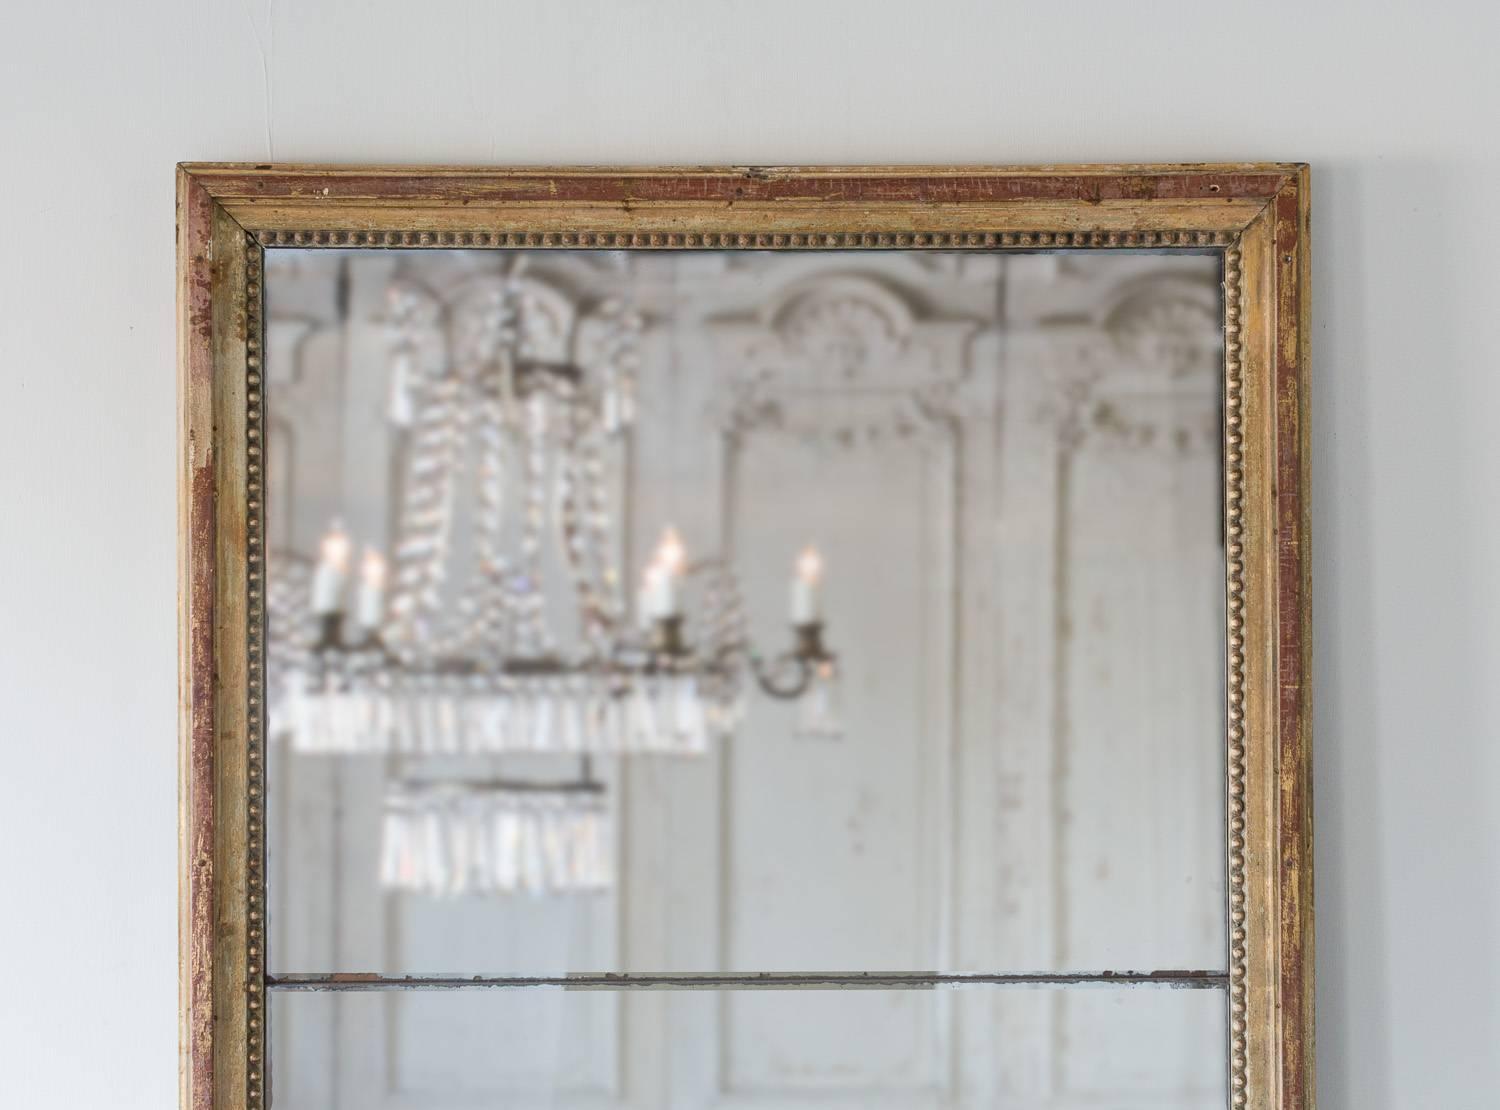 Simple, two-part mirror in classic, Louis XVI style. A string of beads decorate the inner frame keeping this beauty simple and effective. The original, mercury glass is in wonderful condition considering its age. Minor scratches and distressing adds